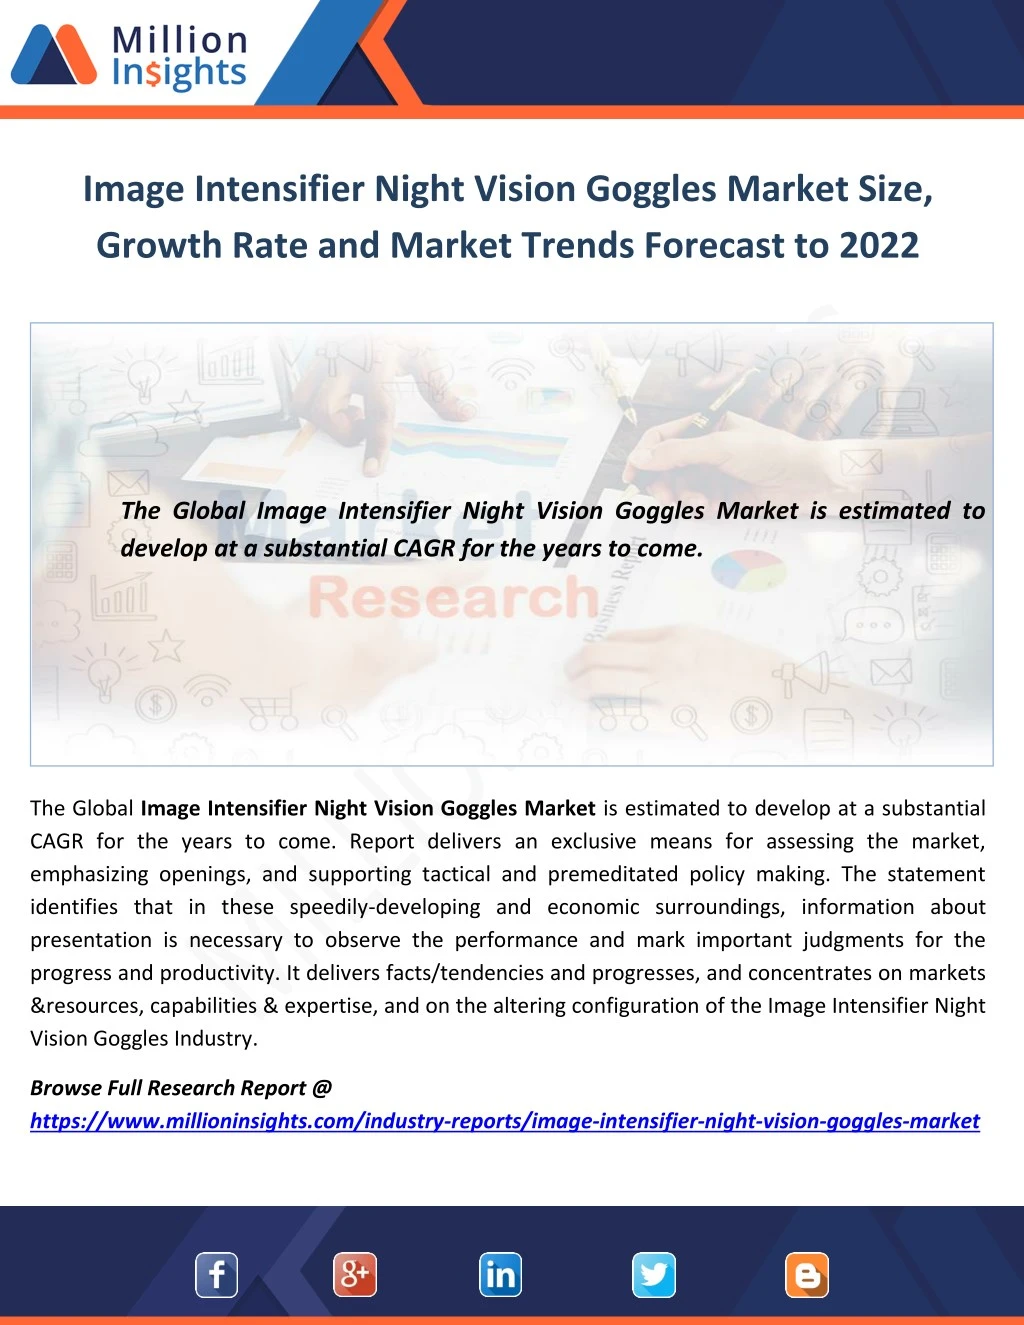 image intensifier night vision goggles market